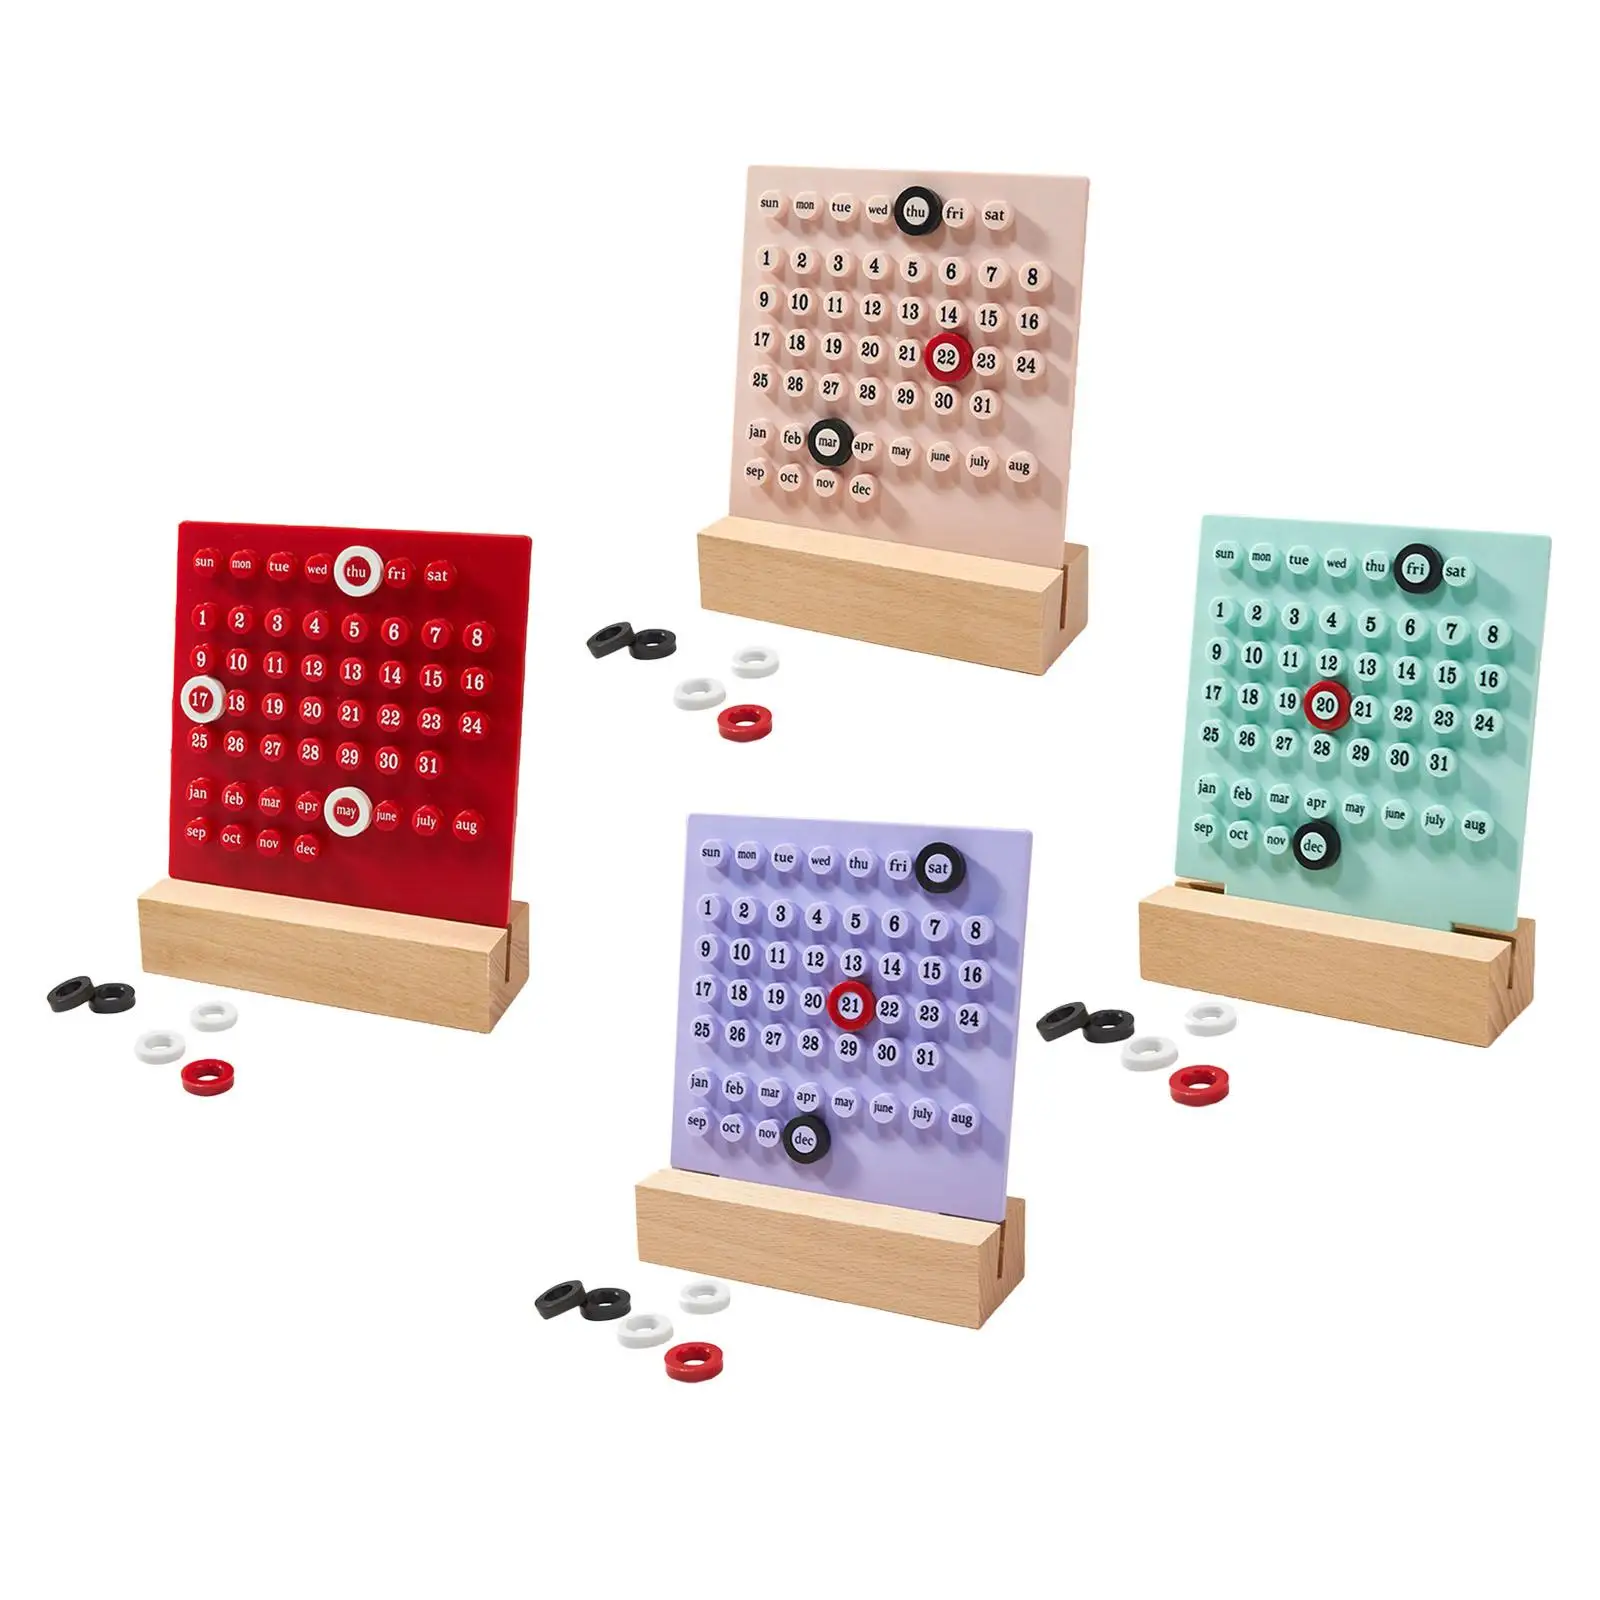 Aesthetic Learning Calendar Montessori Supplies Ornaments Desk Calendar for Gifts Indoor